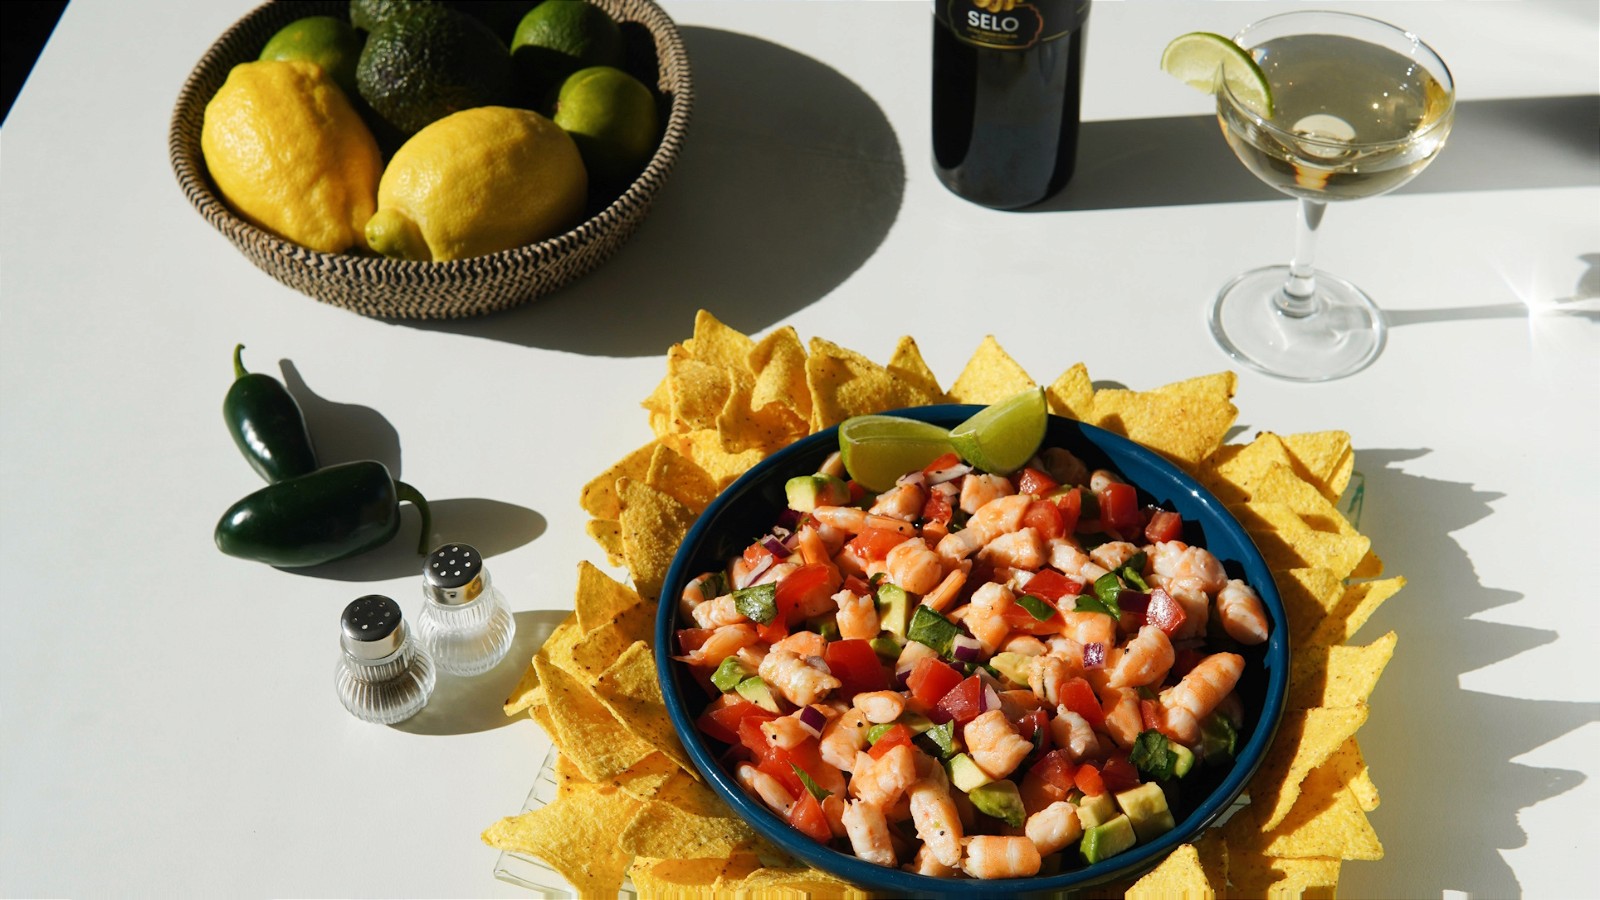 Image of Ceviche with Shrimp and Avocado